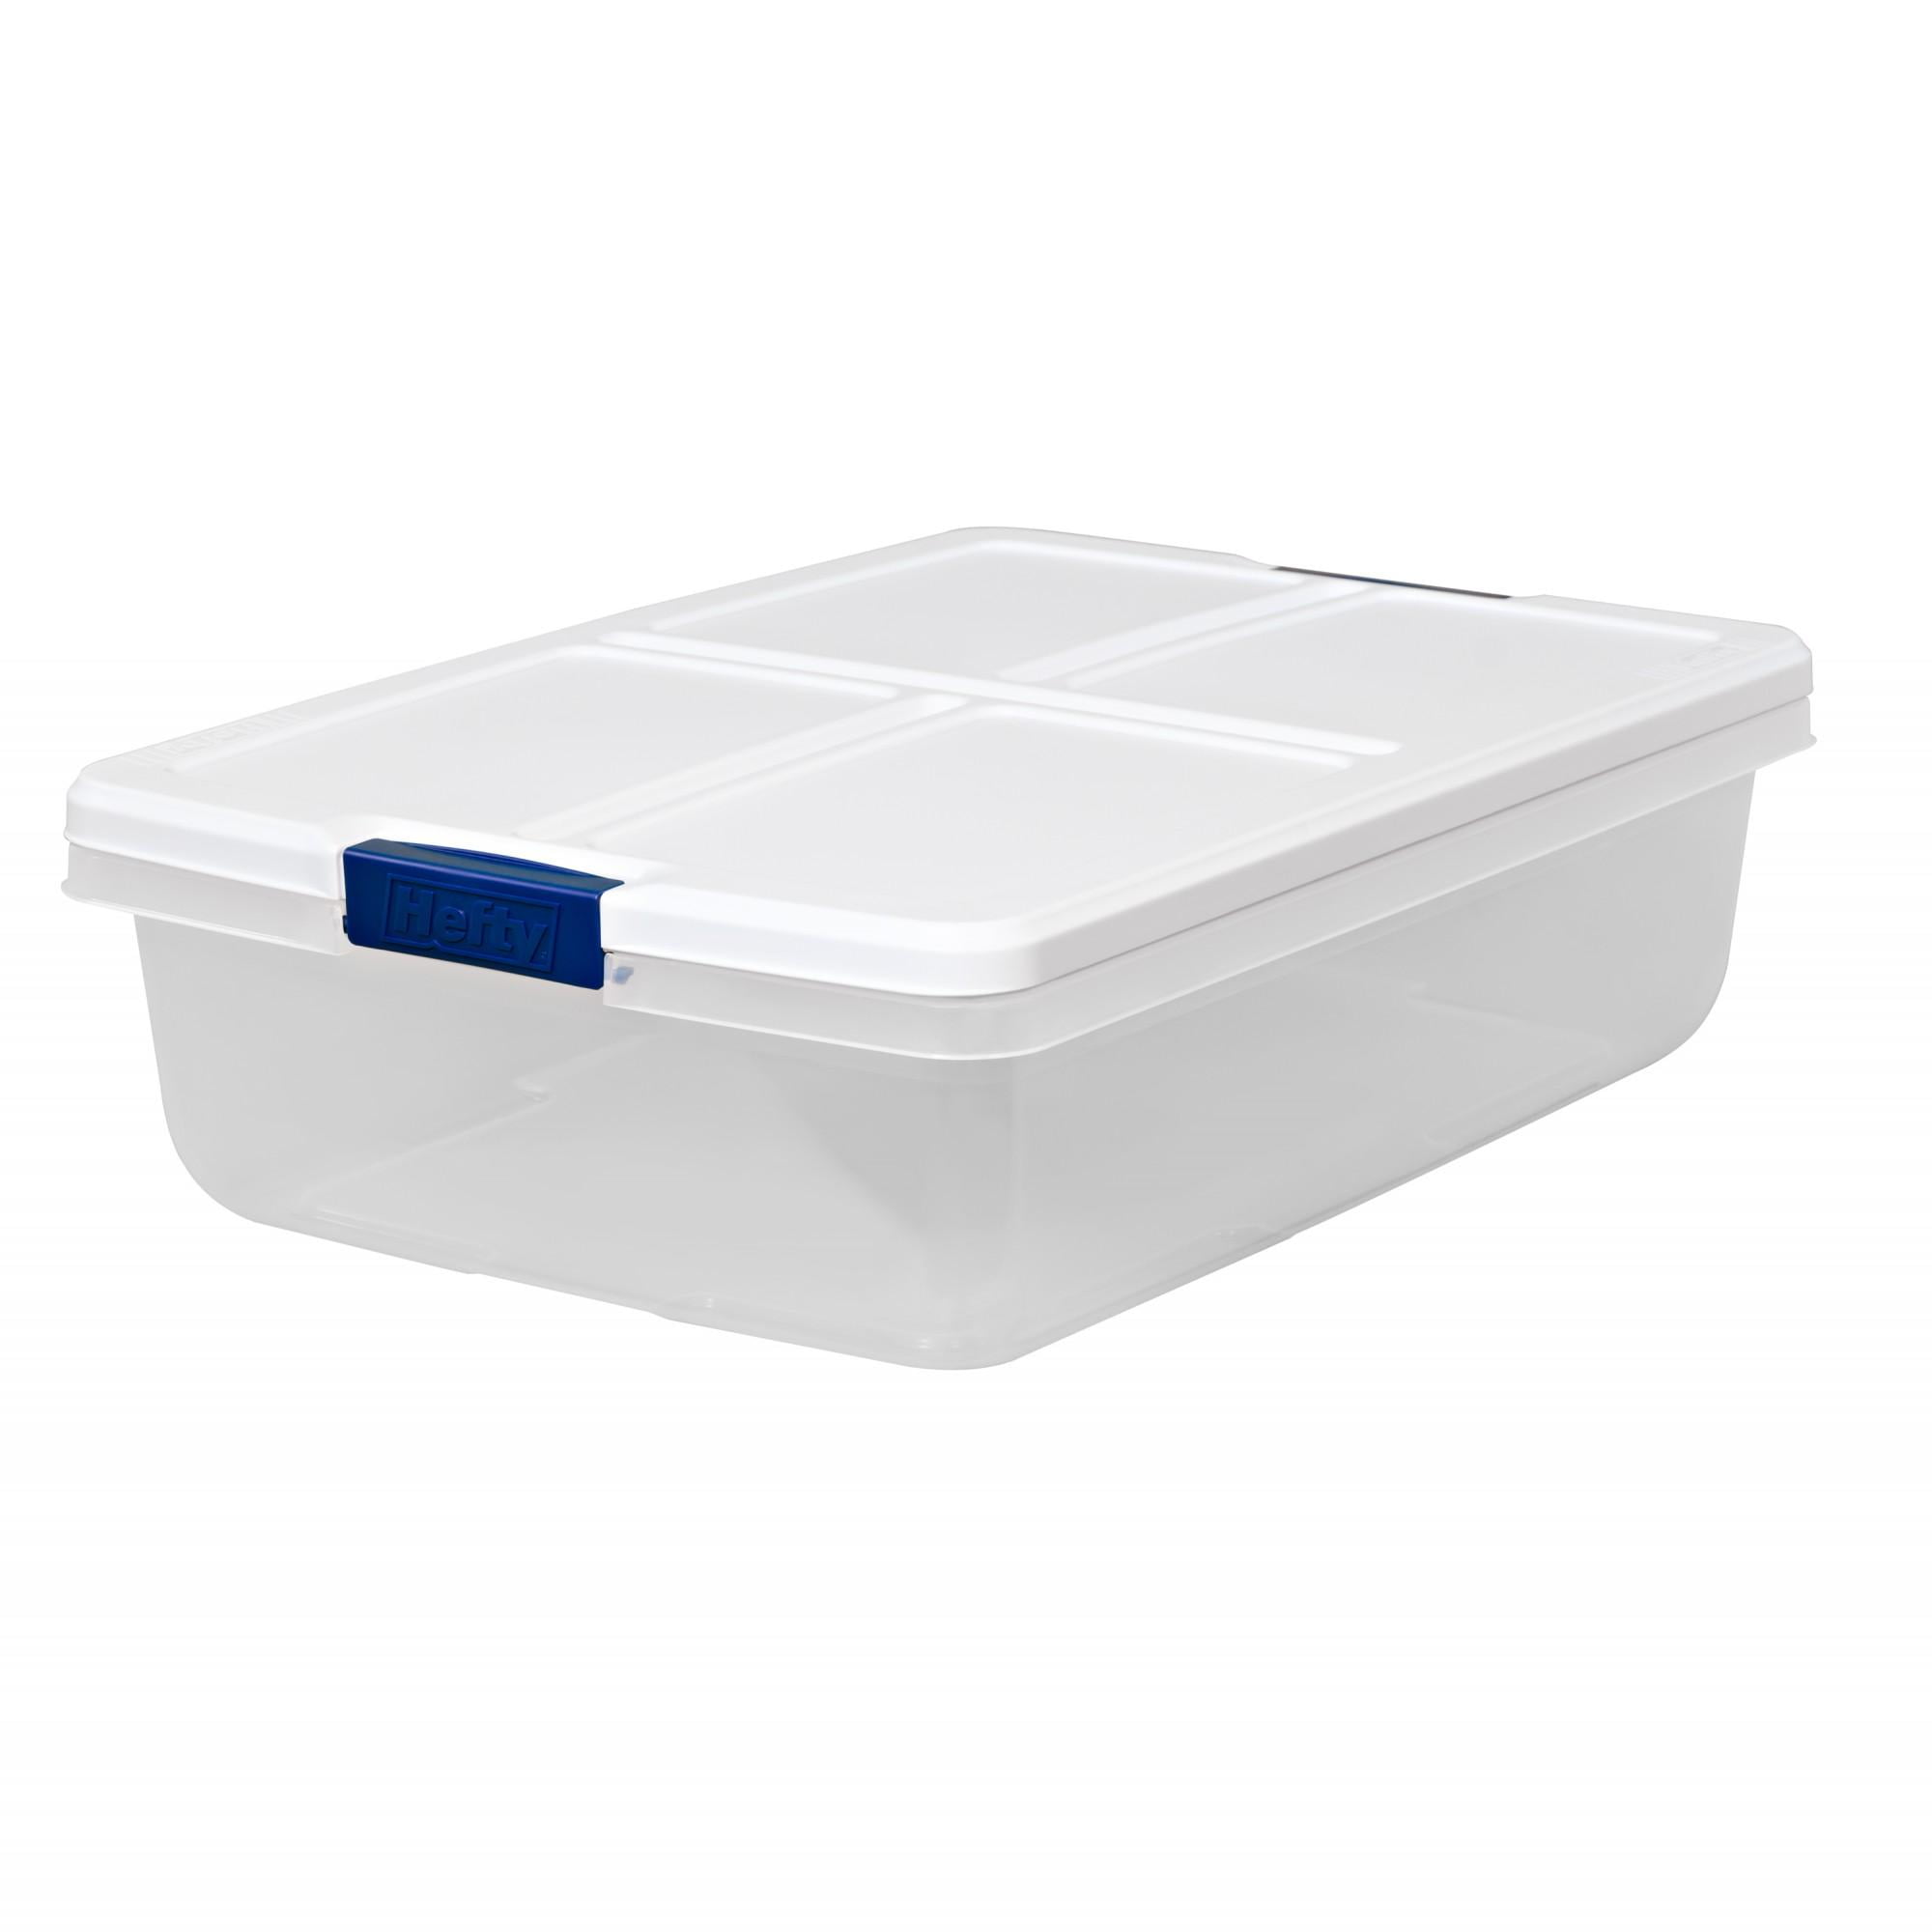 Hefty 8.5 Gallon Latched Plastic Storage Bin with Lid, White